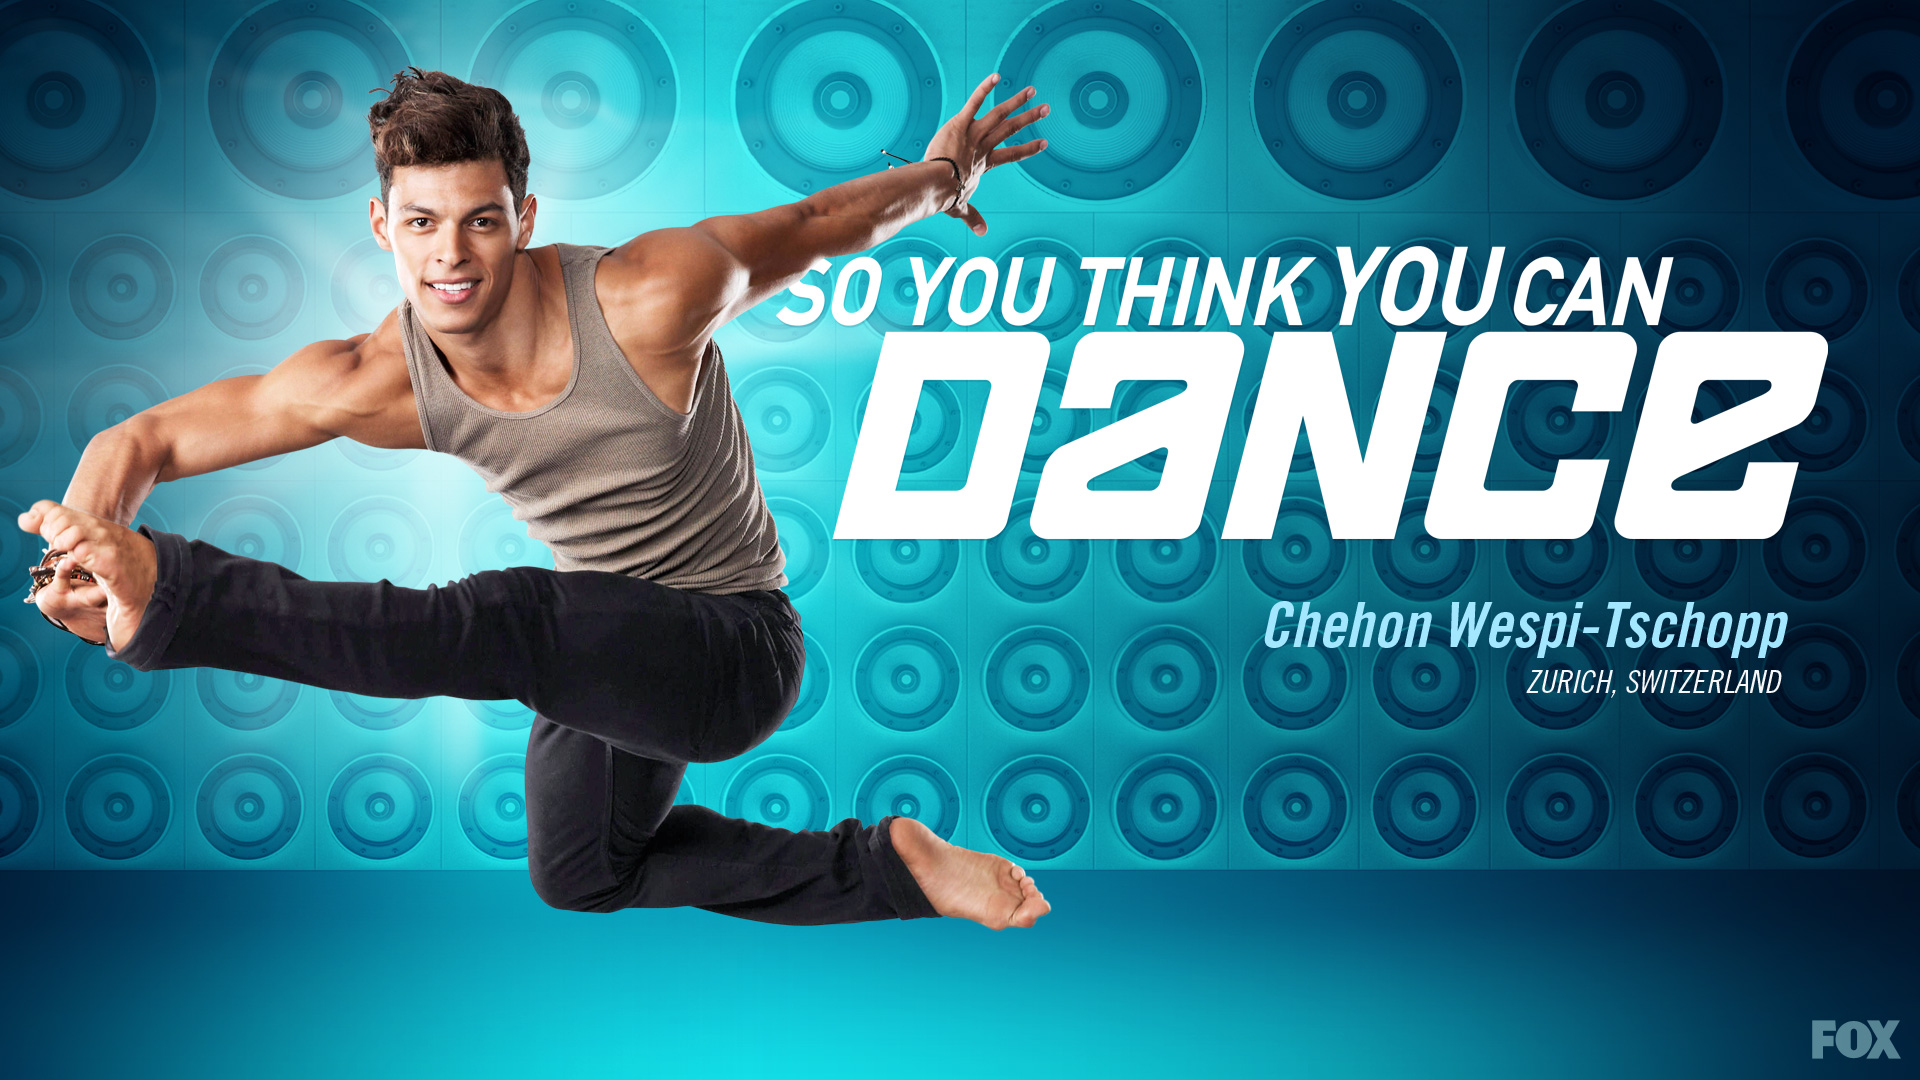 So You Think You Can Dance wallpaper 6